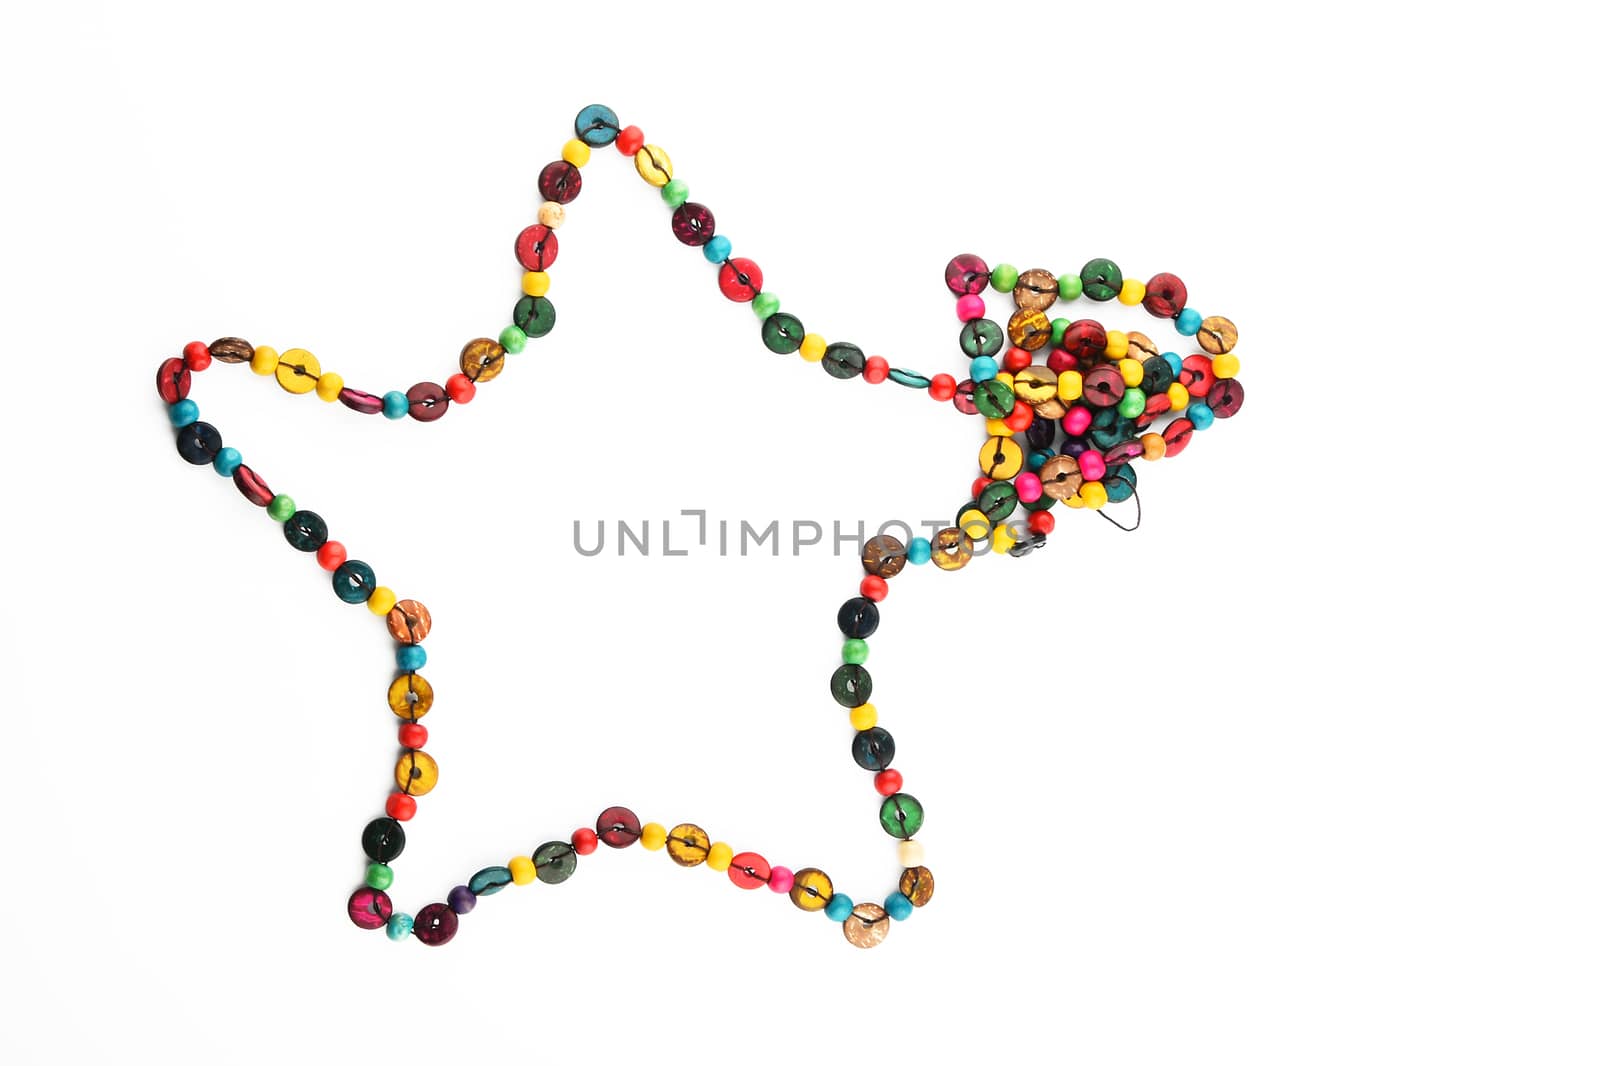 Star shaped colorful handmade wooden round beads necklace isolated on white